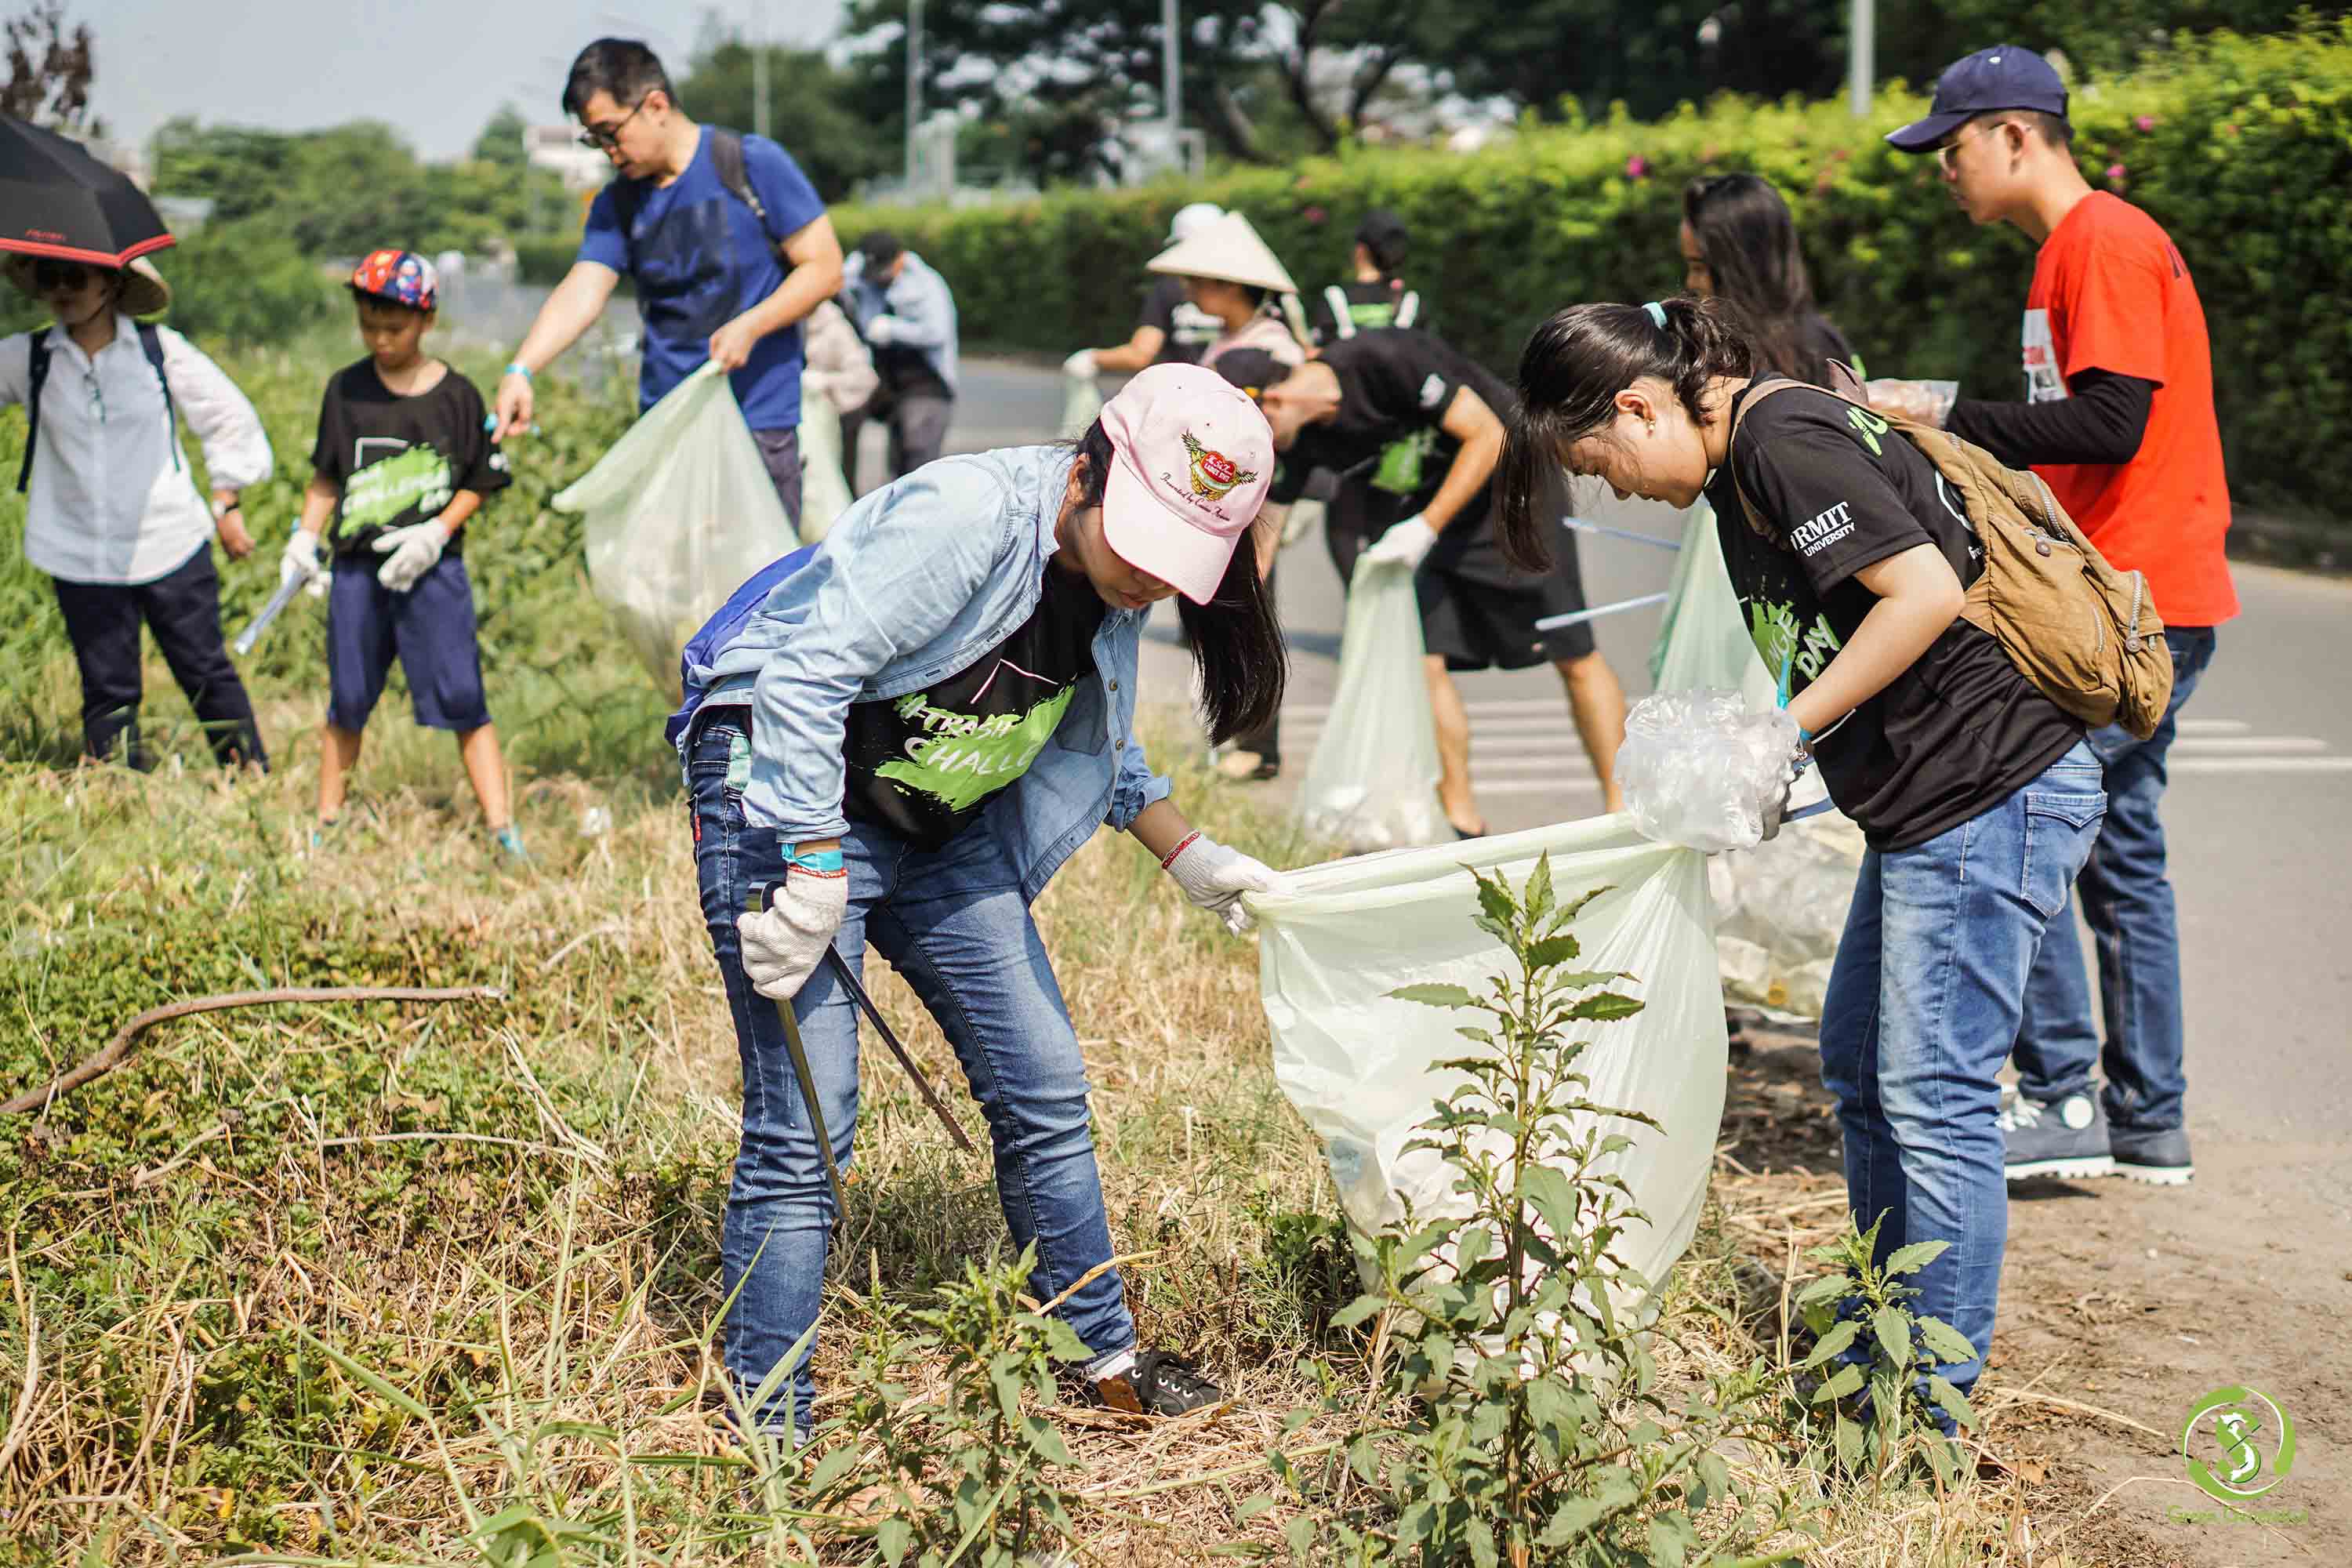 RMIT staff and students, along with other volunteers from around Ho Chi Minh City, participated in the viral movement #TrashChallenge on Earth Day. The event was organised by RMIT Assoc Lecturer Nguyen Huu Nhan and RMIT Vietnam Green Generation Club.